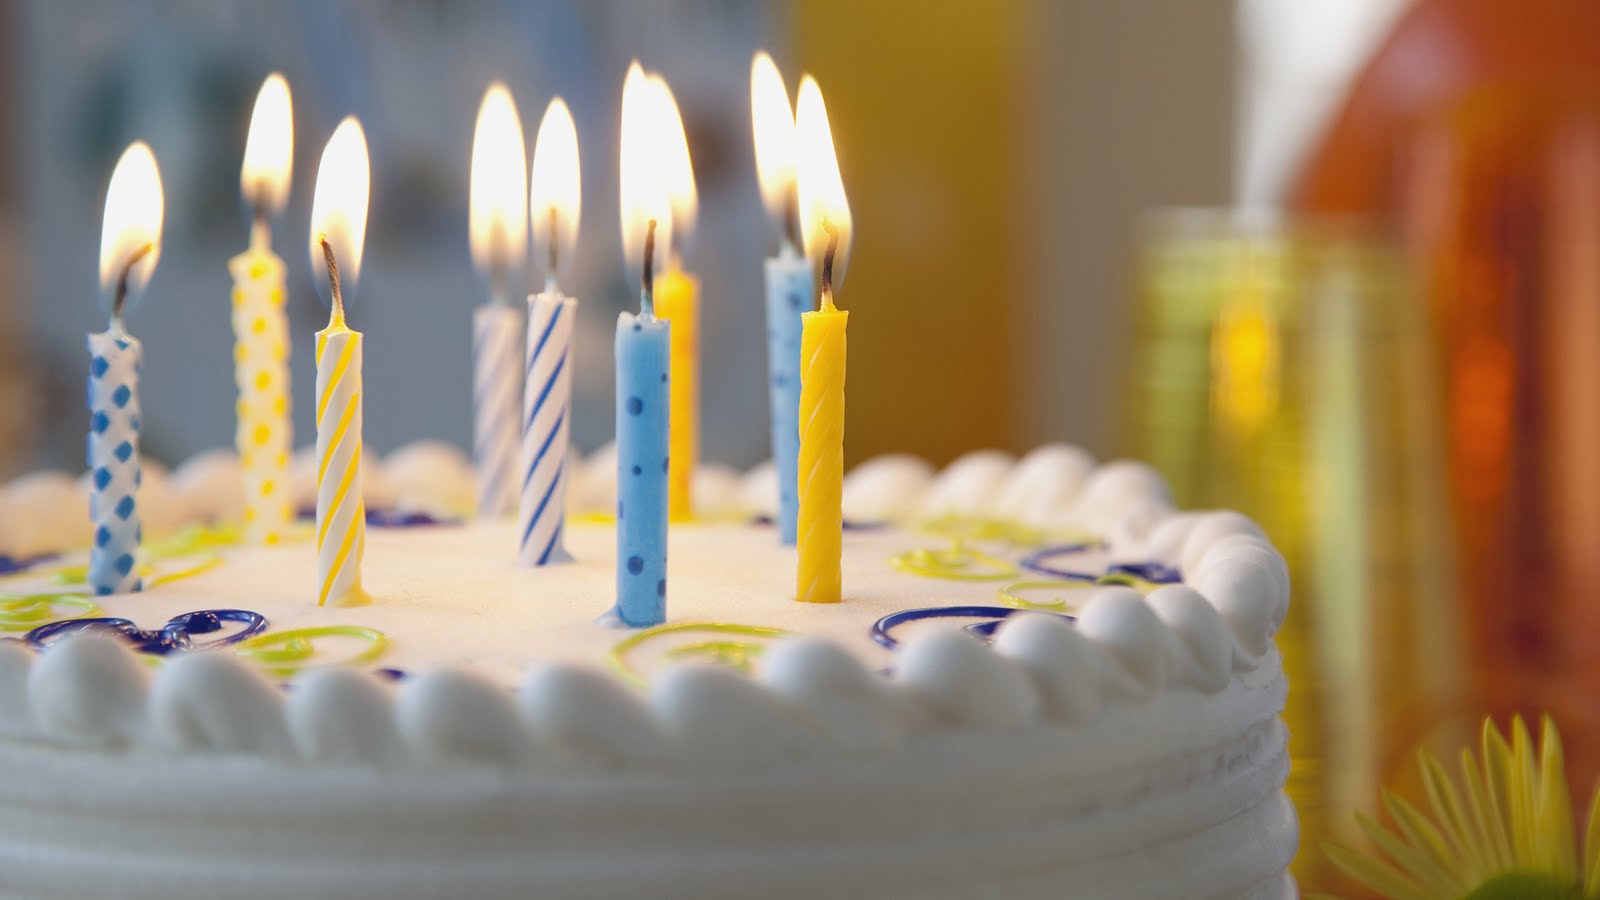 BirtHDay Cake And Candles Desktop Wallpaper HD